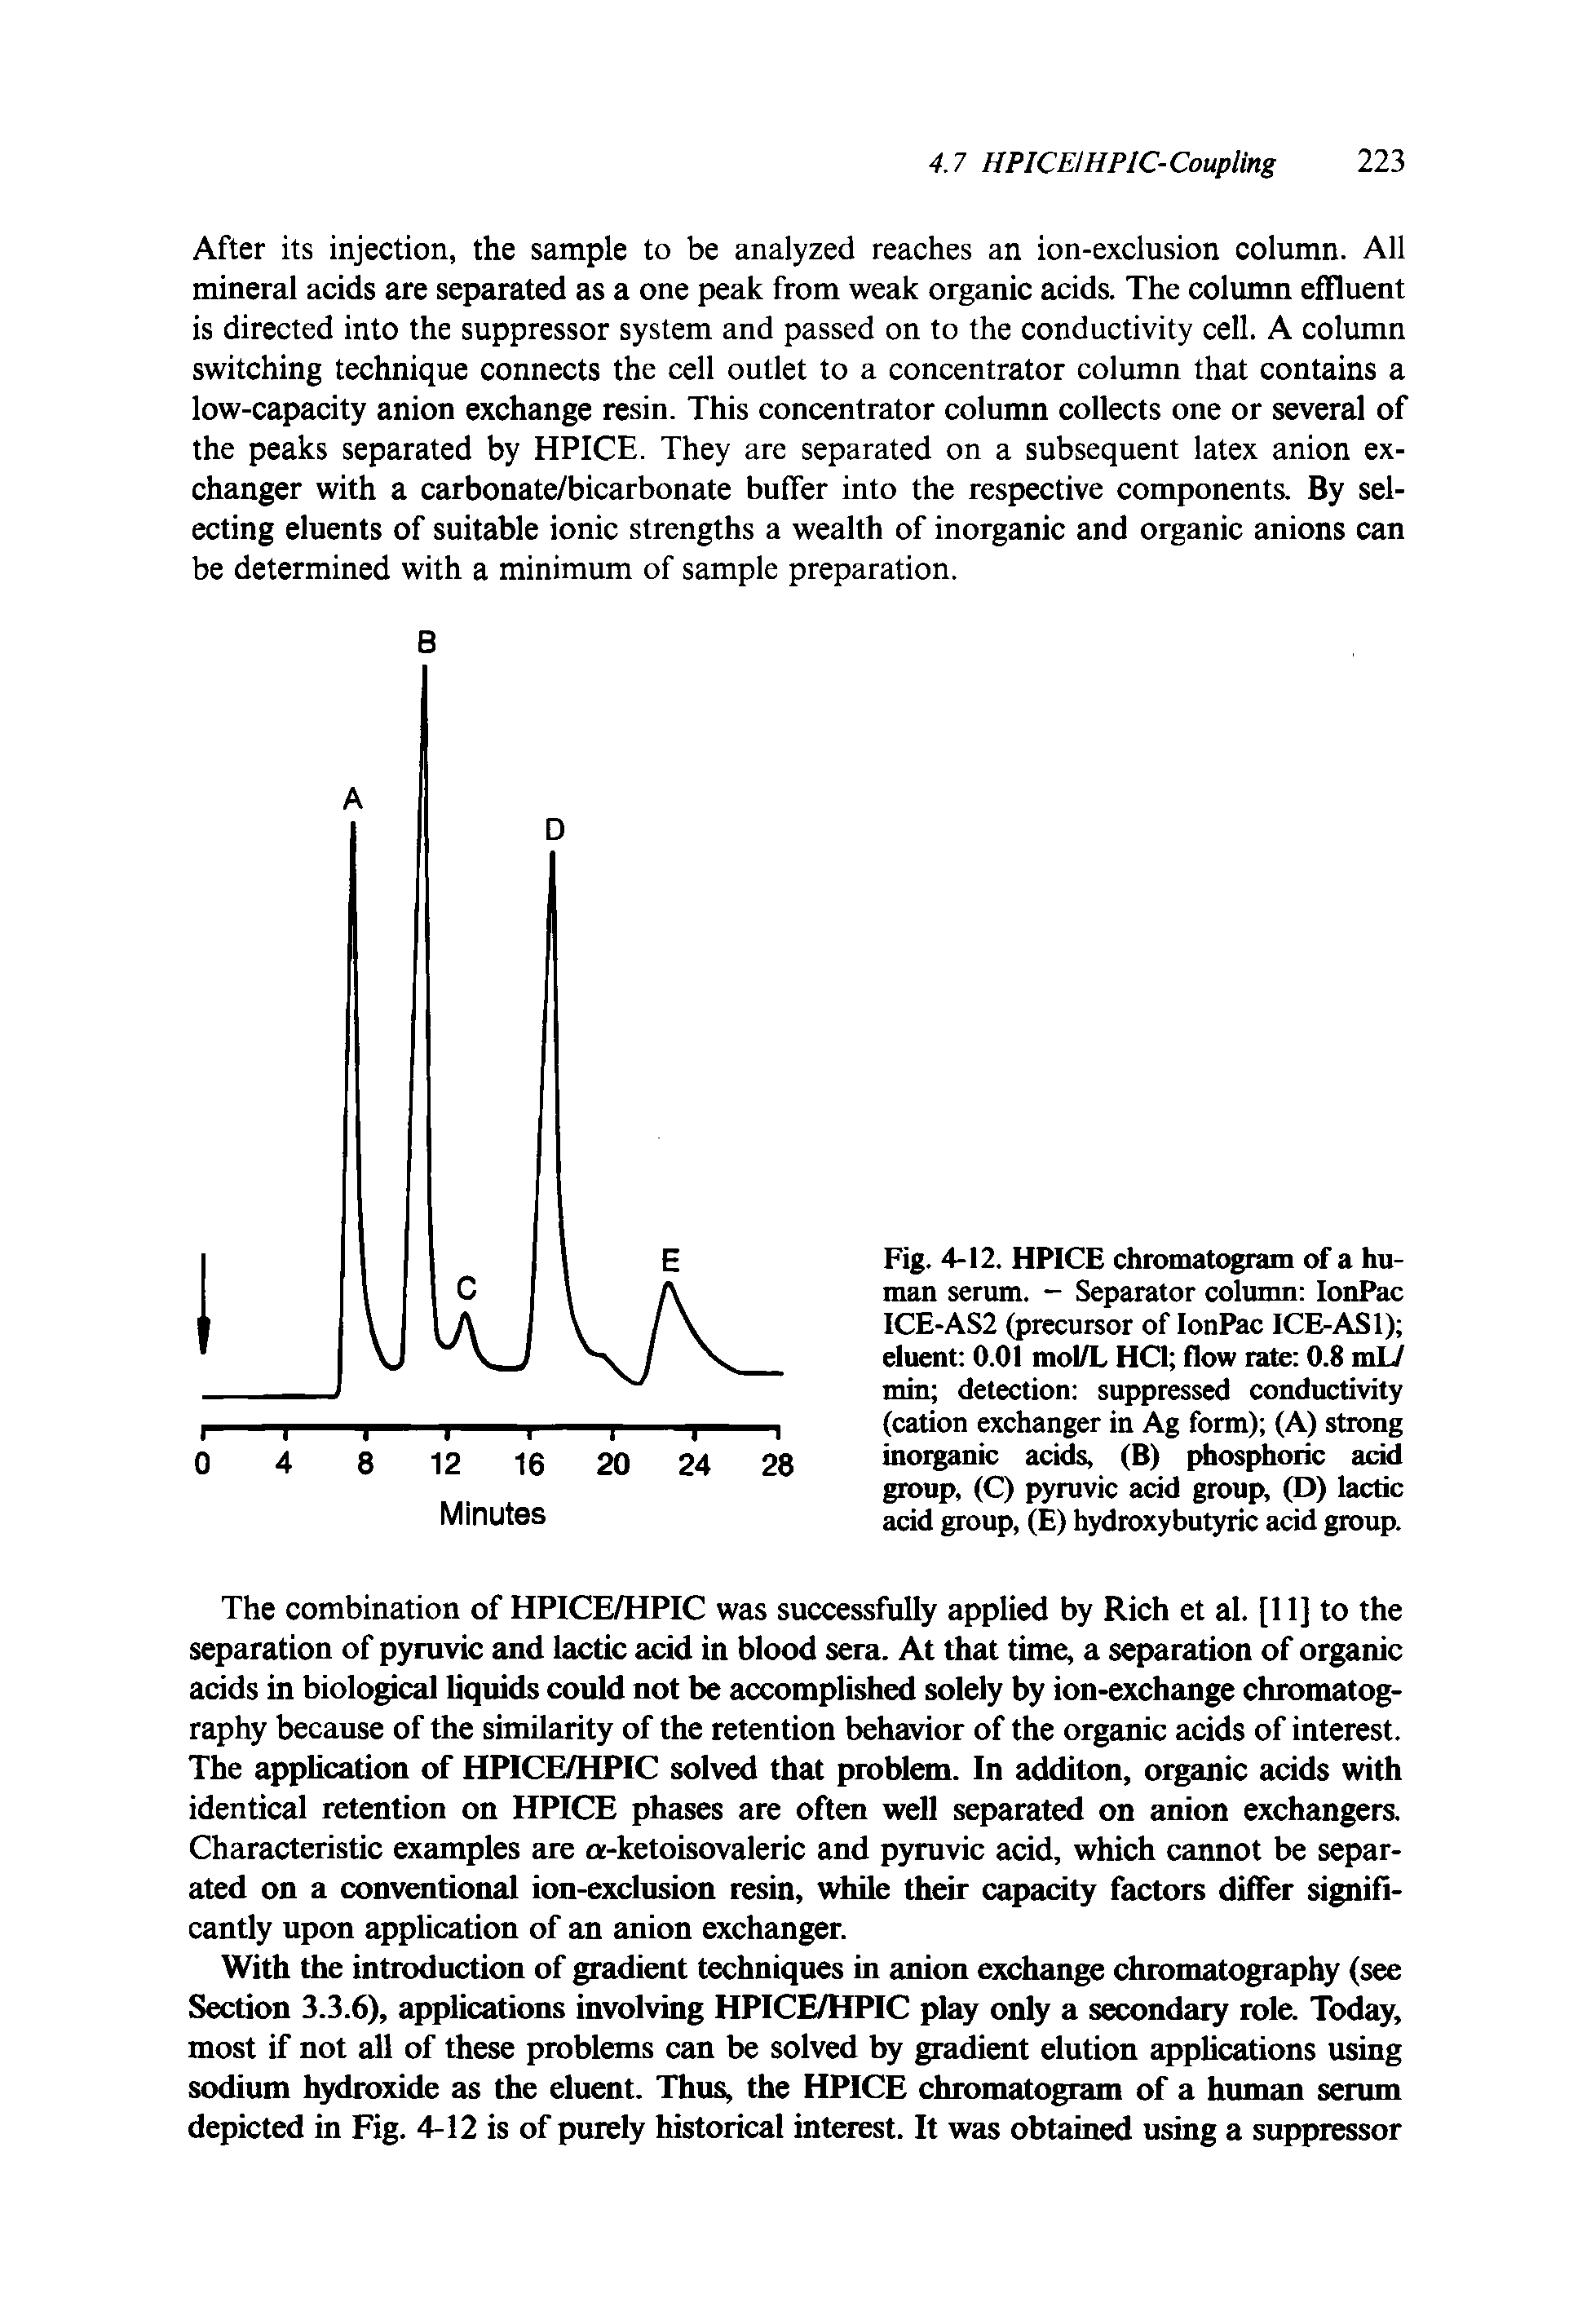 Fig. 4-12. HPICE chromatogram of a human serum. - Separator column IonPac ICE-AS2 (precursor of IonPac ICE-AS1) eluent 0.01 mol/L HC1 flow rate 0.8 mL/ min detection suppressed conductivity (cation exchanger in Ag form) (A) strong inorganic acids, (B) phosphoric acid group, (C) pyruvic add group, (D) lactic acid group, (E) hydroxybutyric acid group.